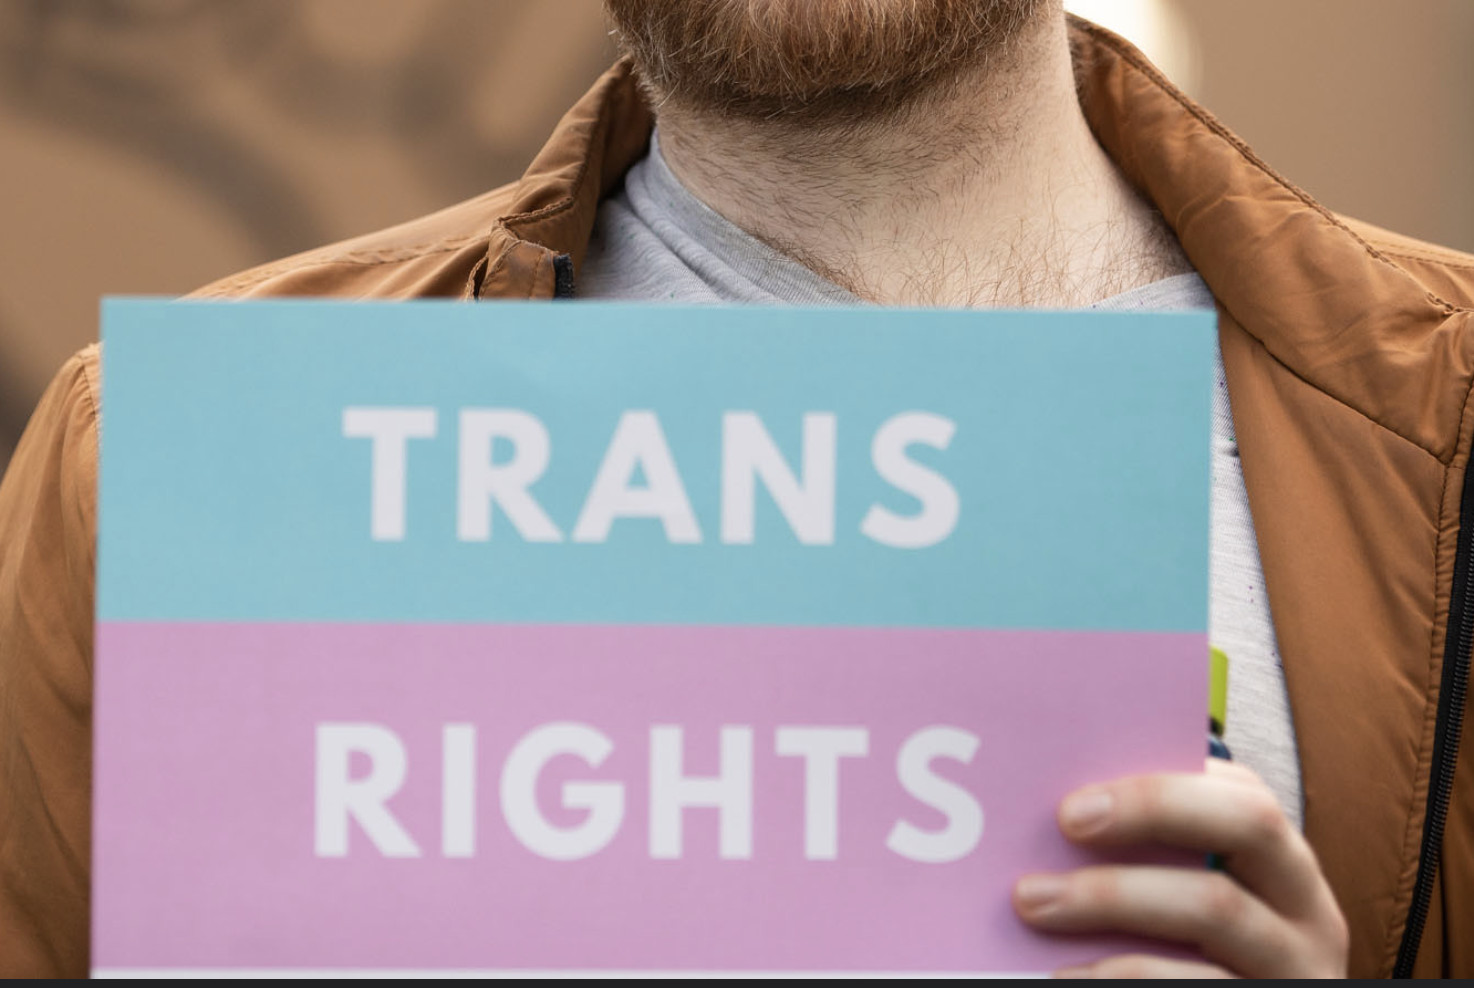 Bearded person holding TRANS RIGHTS sign